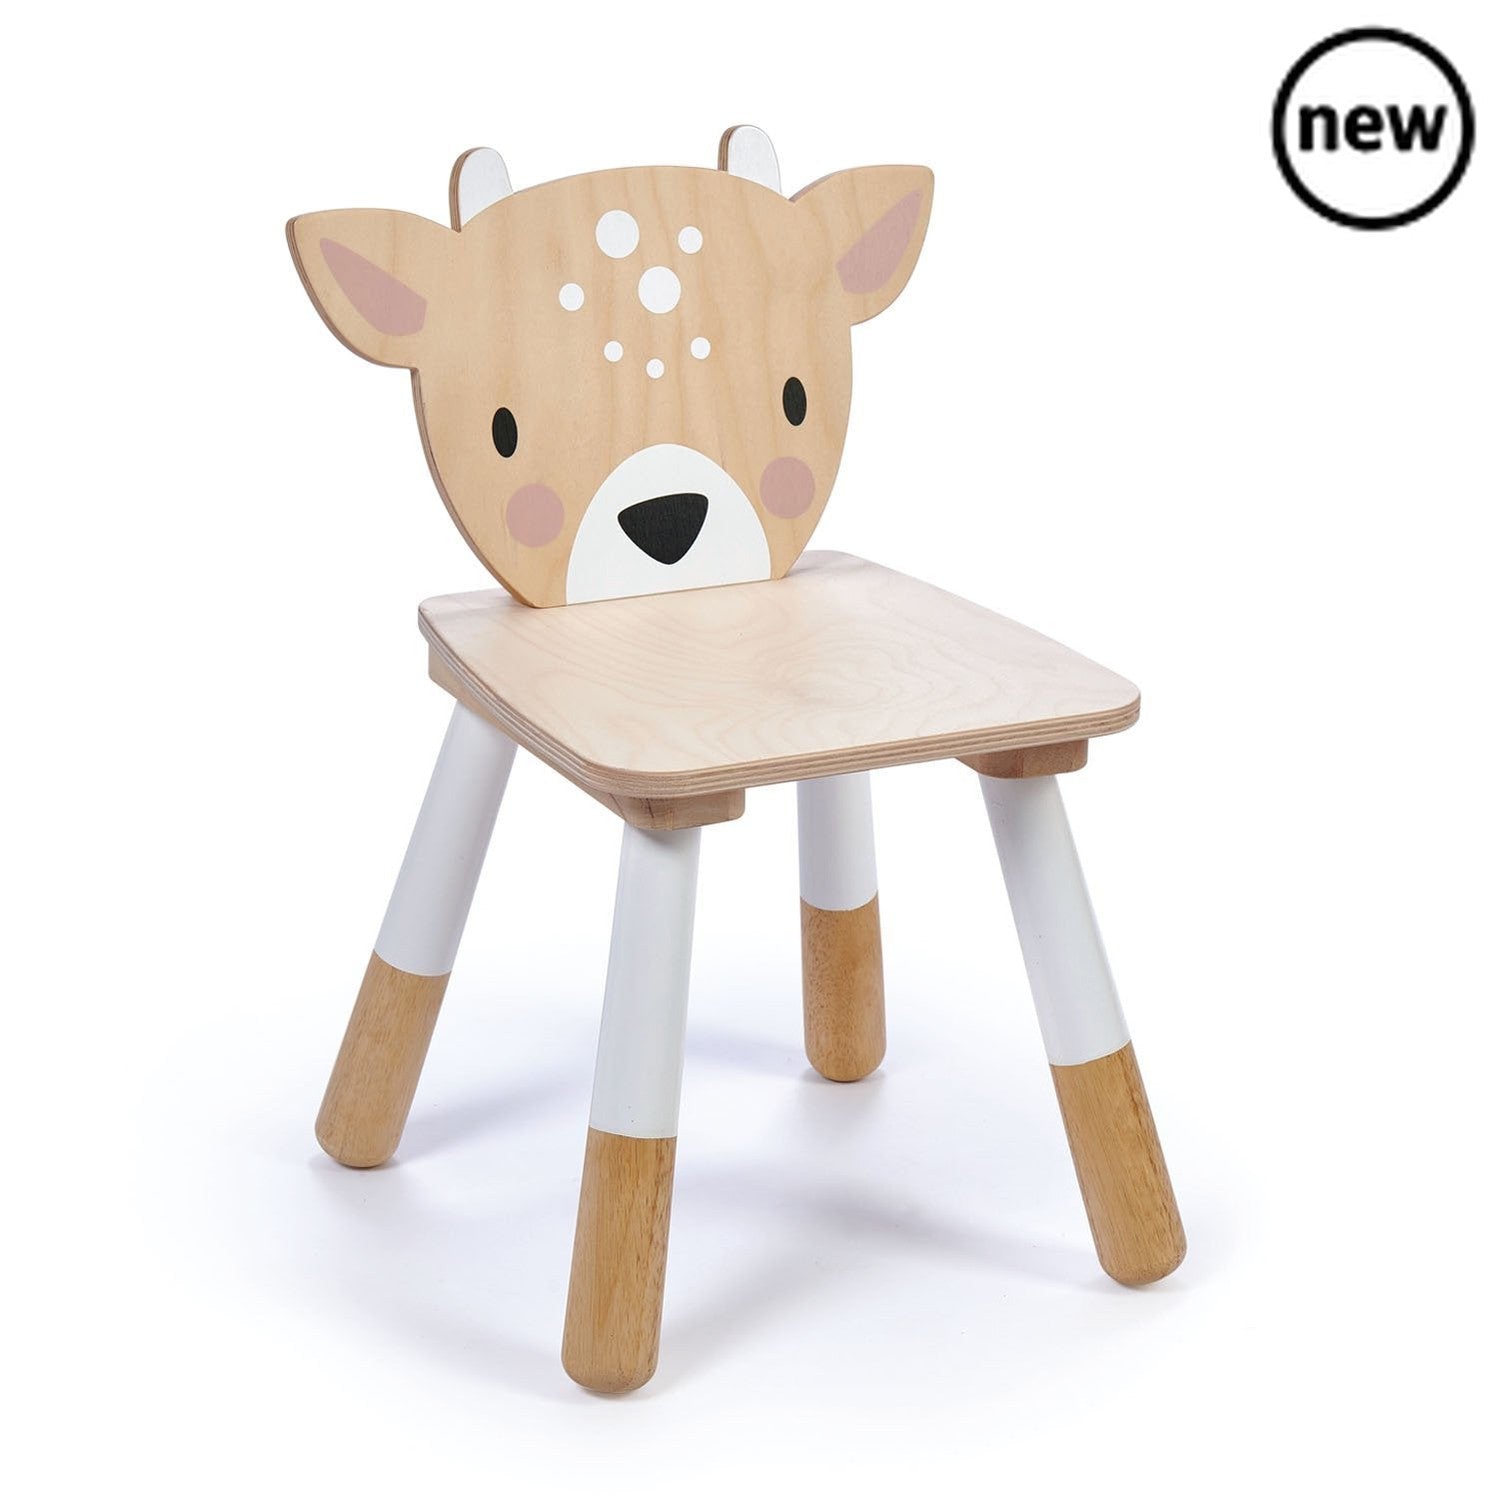 Tenderleaf Toys Wooden Forest Deer Chair, Introducing our whimsical and adorable Deer Chair by Tender Leaf Toys - the perfect addition to any play area or dining table. Crafted with top-quality plywood, this chair is not only durable but also brings a touch of playful charm to any space.Designed to perfectly complement the Tender Leaf Toys Forest Table, this Deer Chair adds an enchanting element to imaginative play and group activities. Children will delight in having their own special seat shaped like a fr